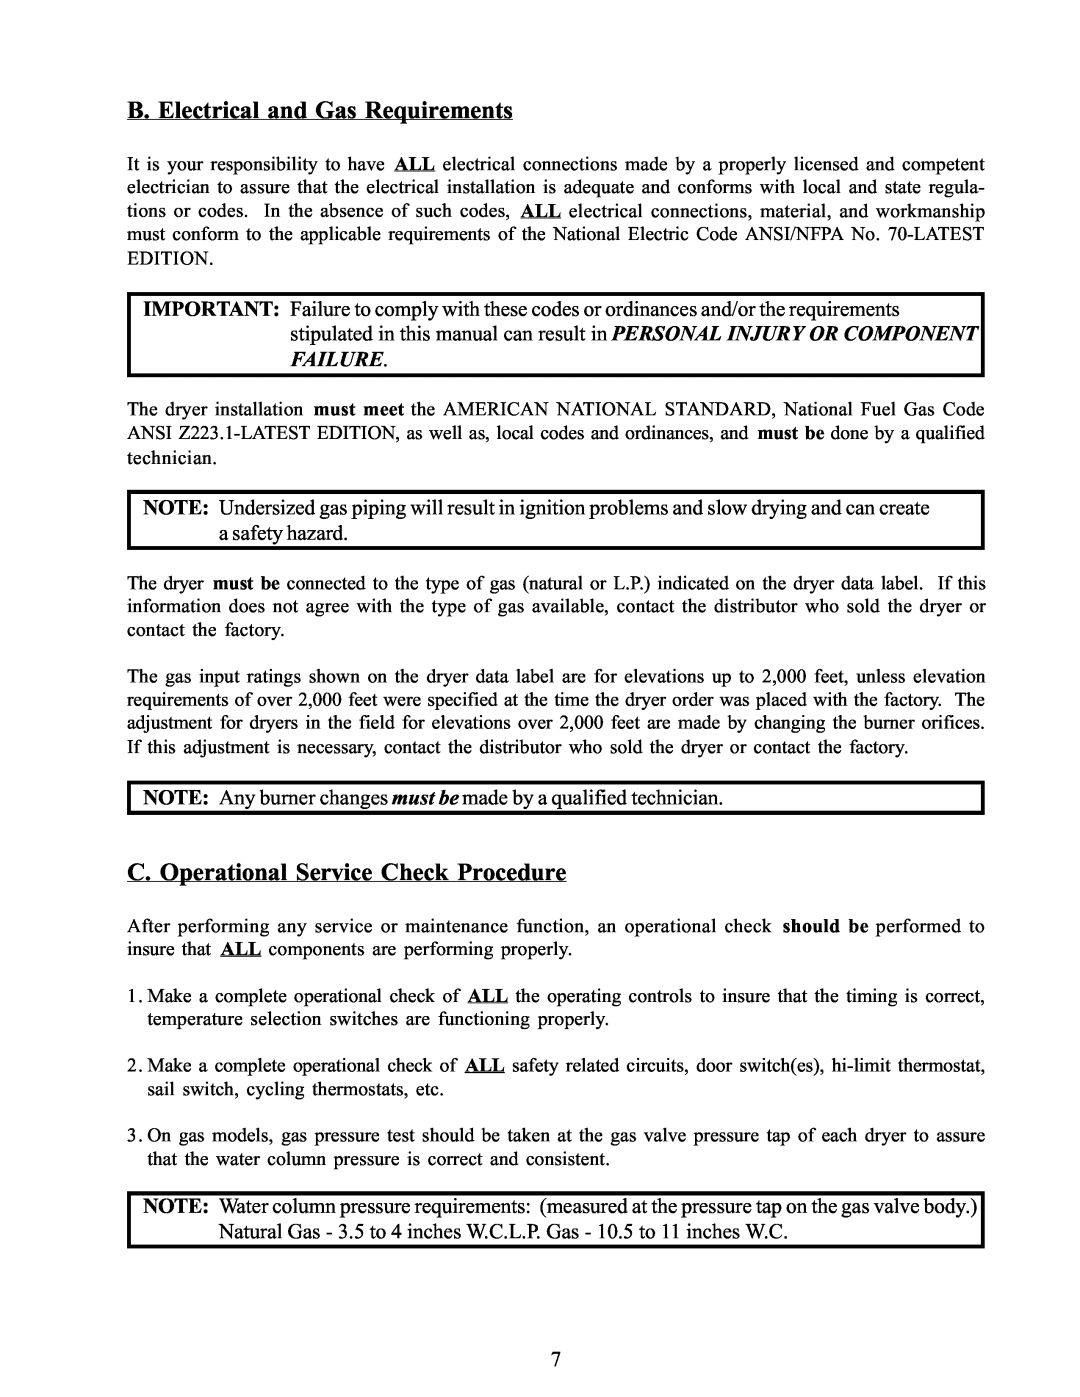 American Dryer Corp WDA-385 service manual B. Electrical and Gas Requirements, C. Operational Service Check Procedure 